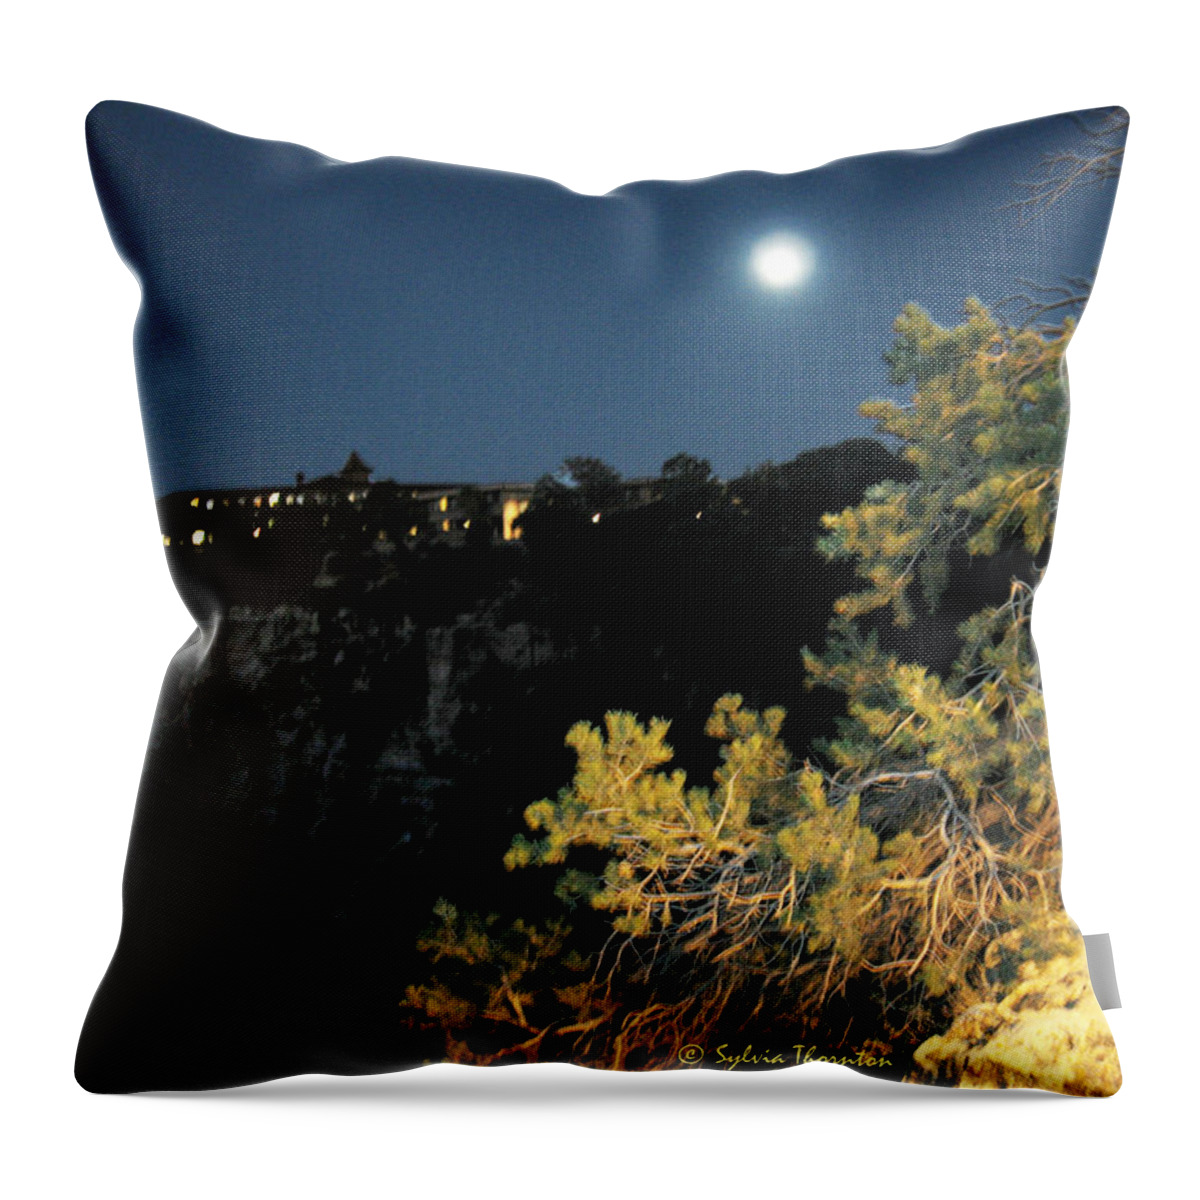 Grand Canyon Throw Pillow featuring the photograph Night Glow by Sylvia Thornton